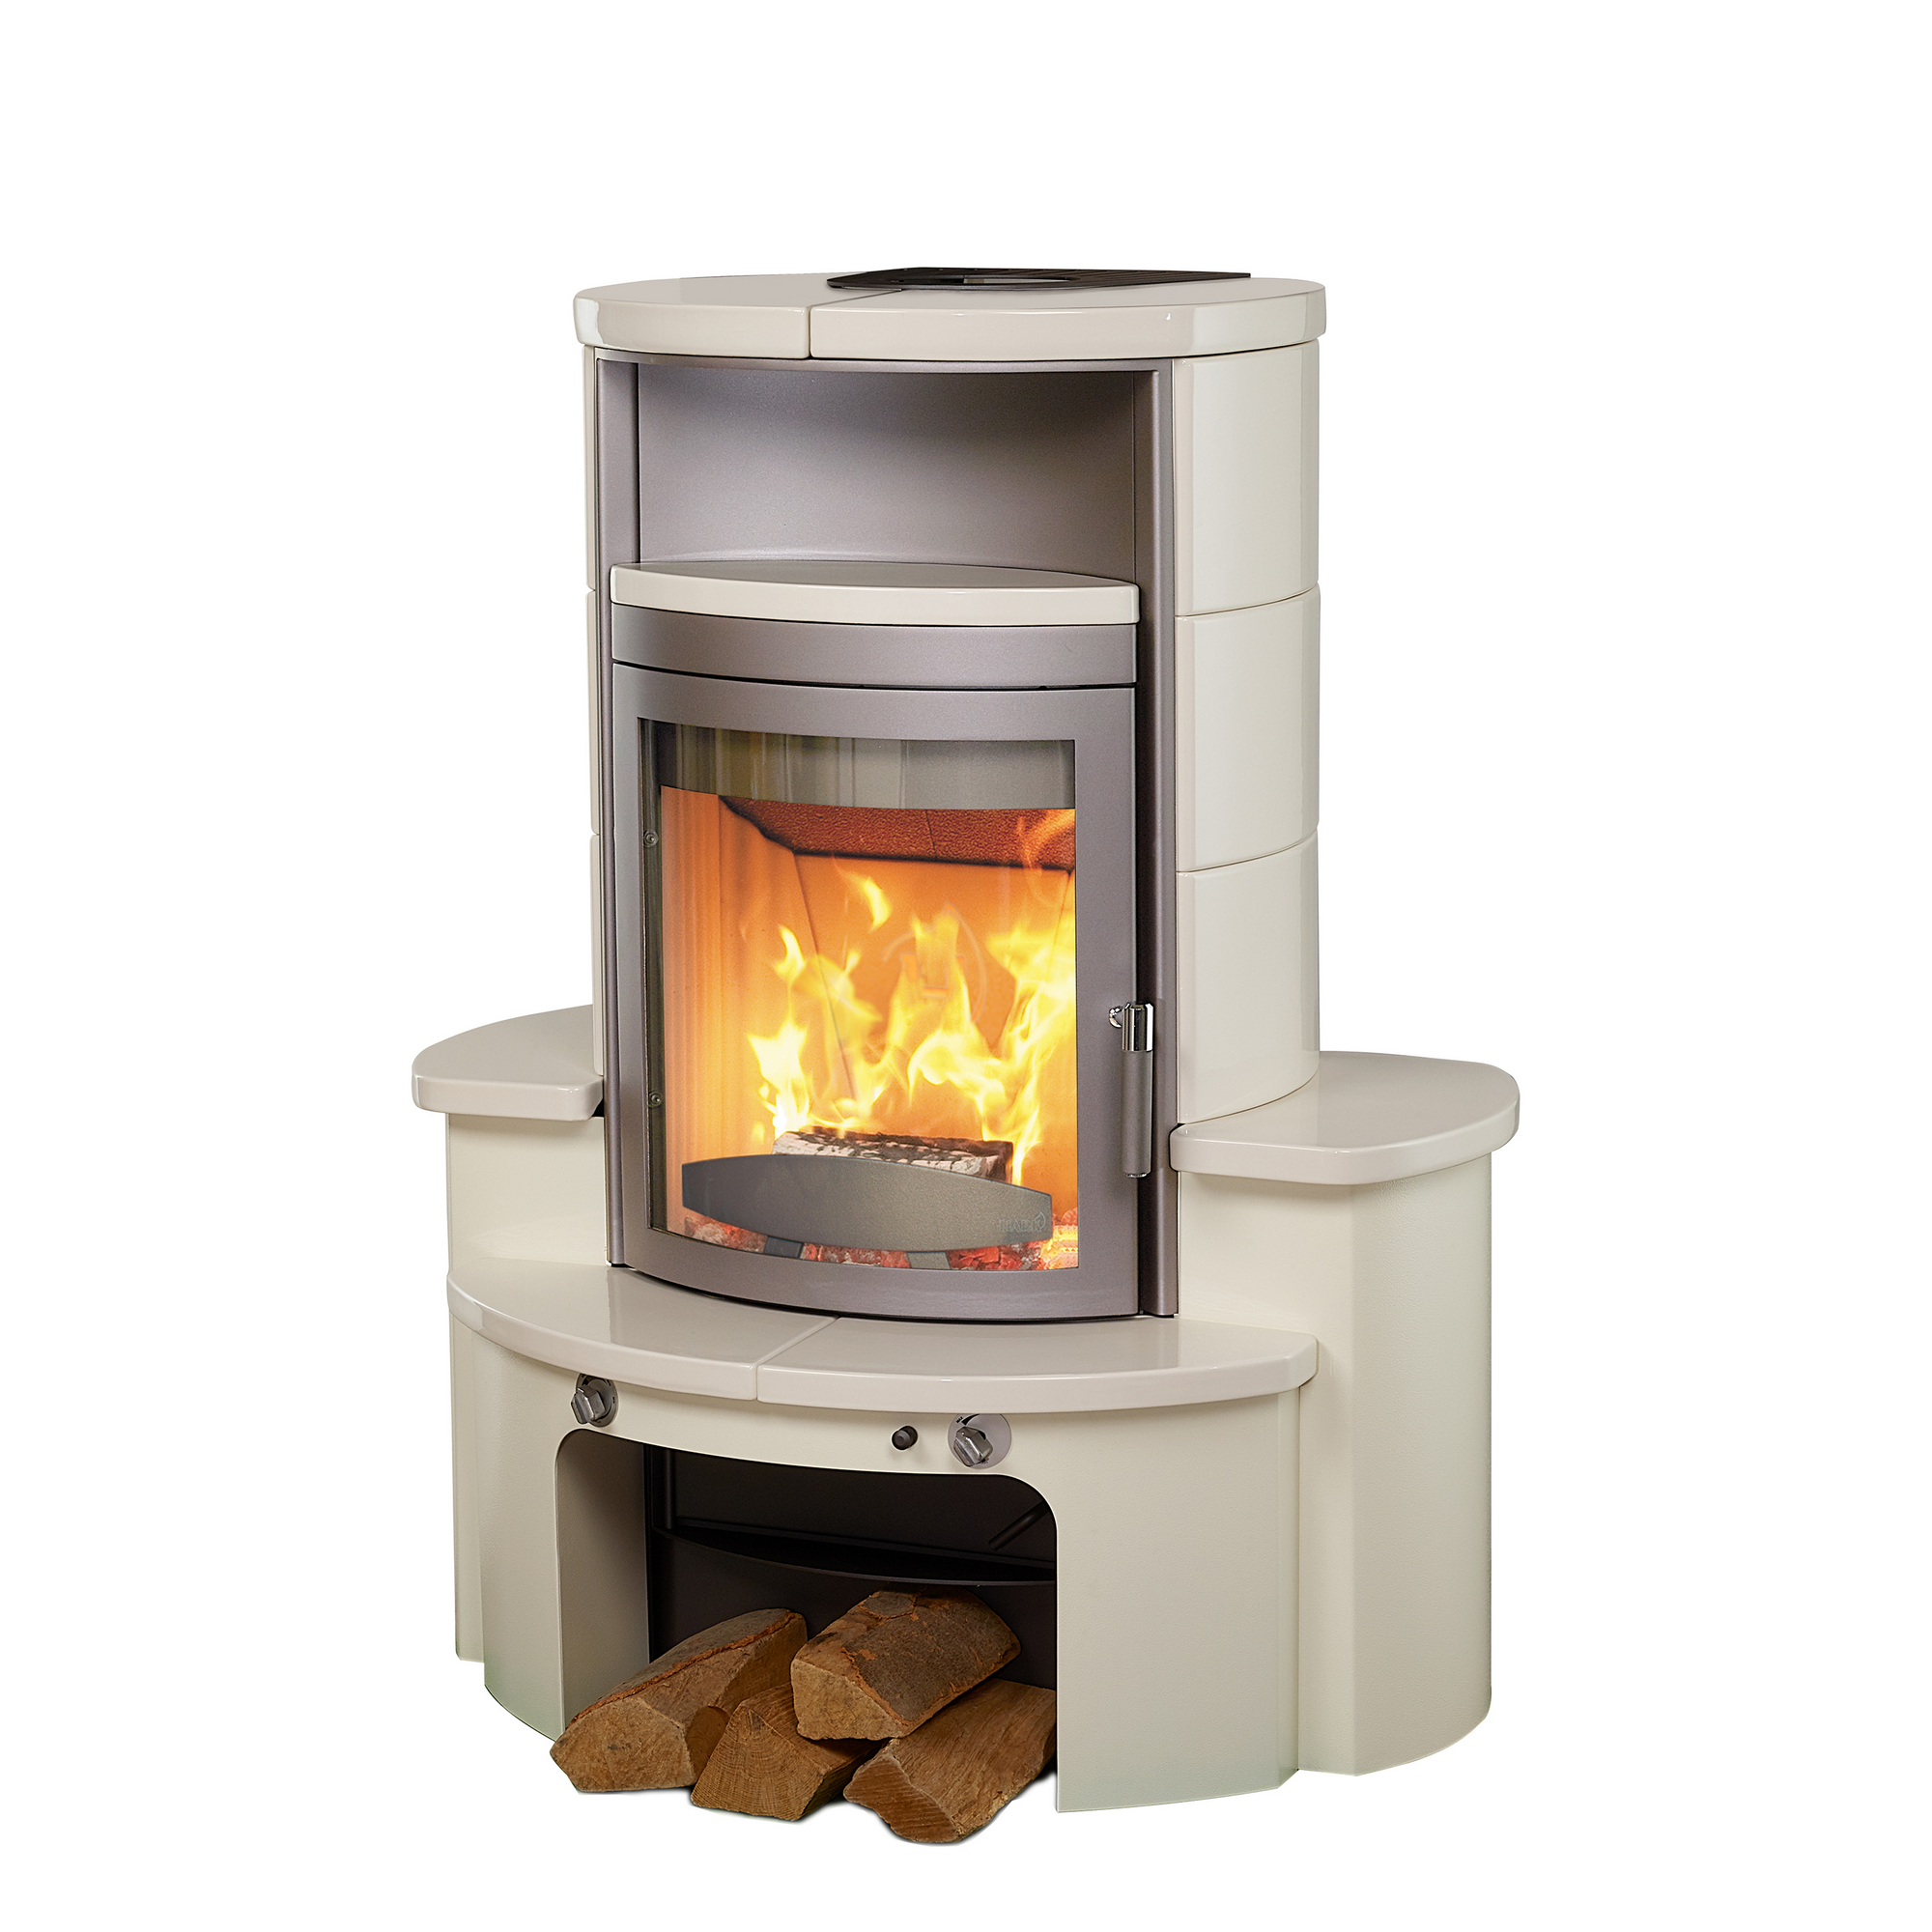 Kaminofen 'Avenso GT ECOplus' titan/creme-weiß 8 kW + product picture